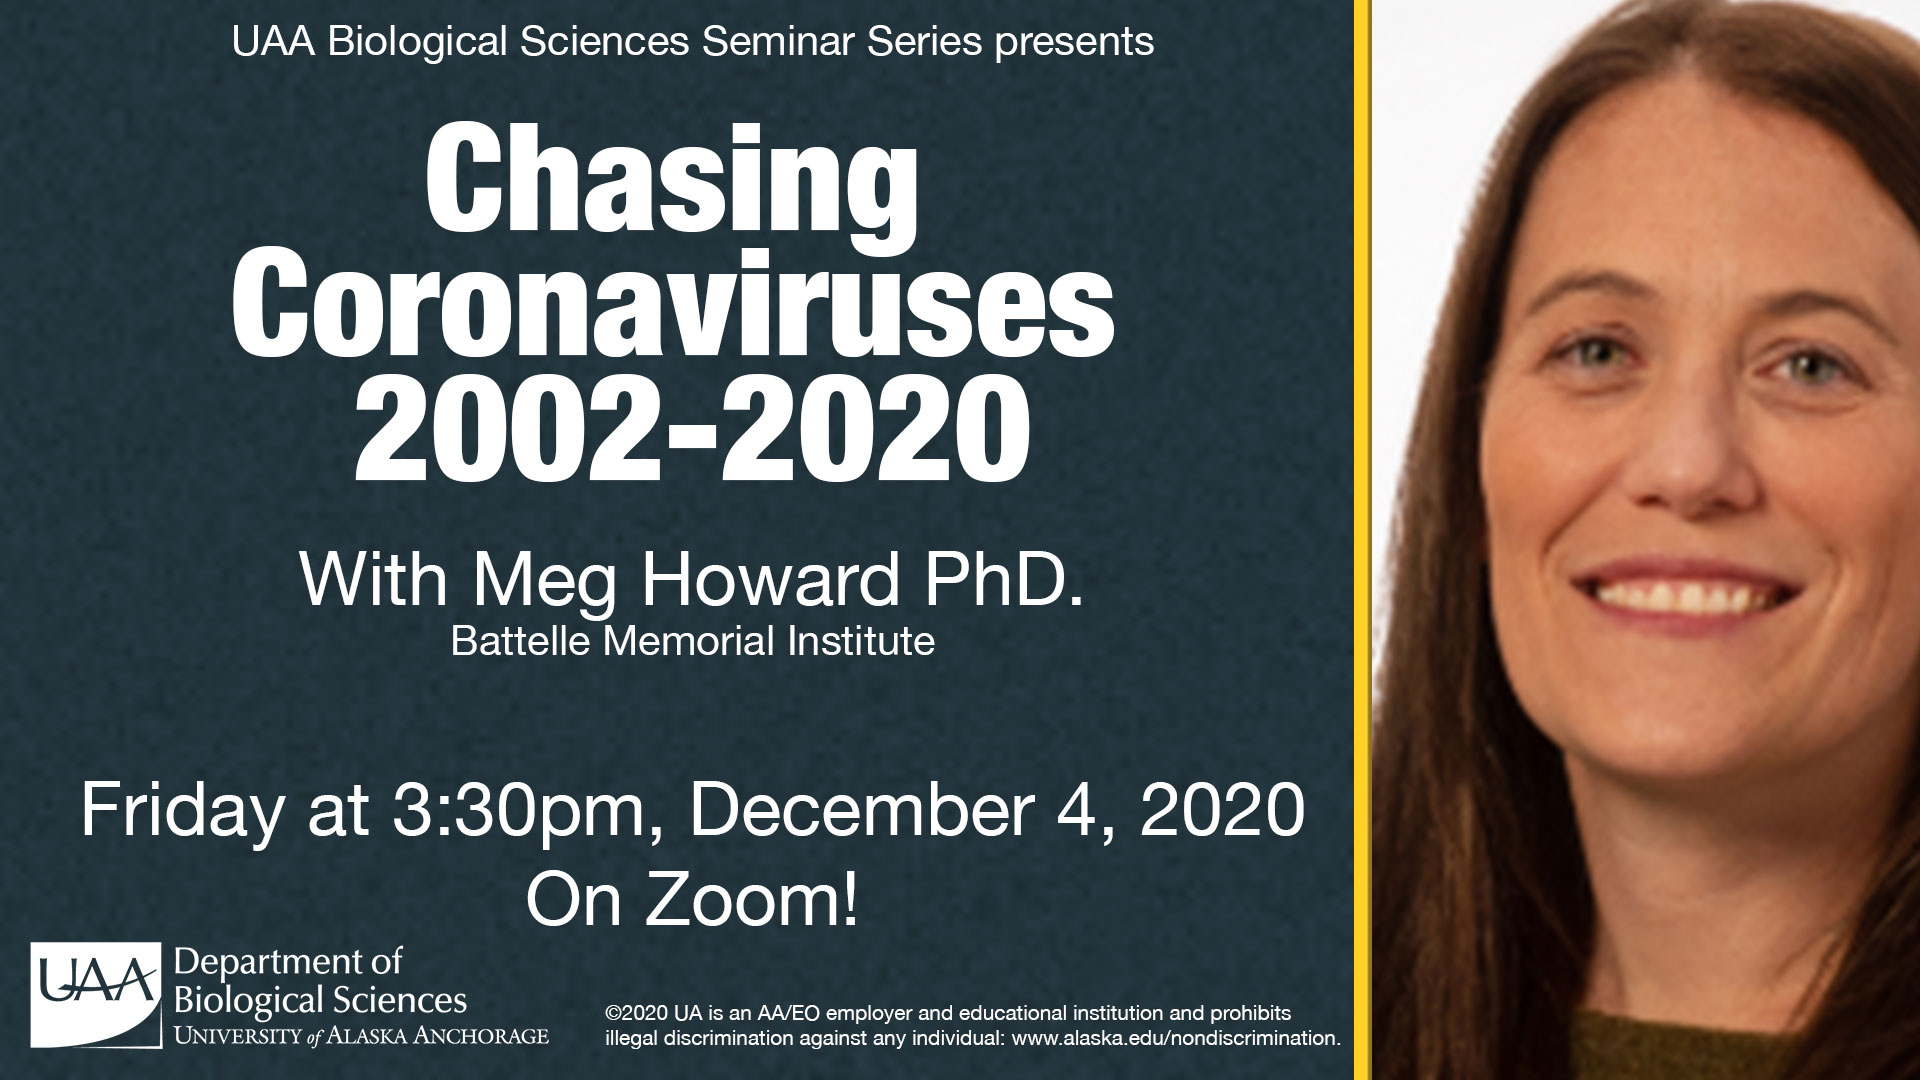 Biological Sciences Seminar presents 'Chasing Coronaviruses 2002-2020' with Dr. Meg Howard on Friday, Dec. 4, at 3:30 p.m. on Zoom